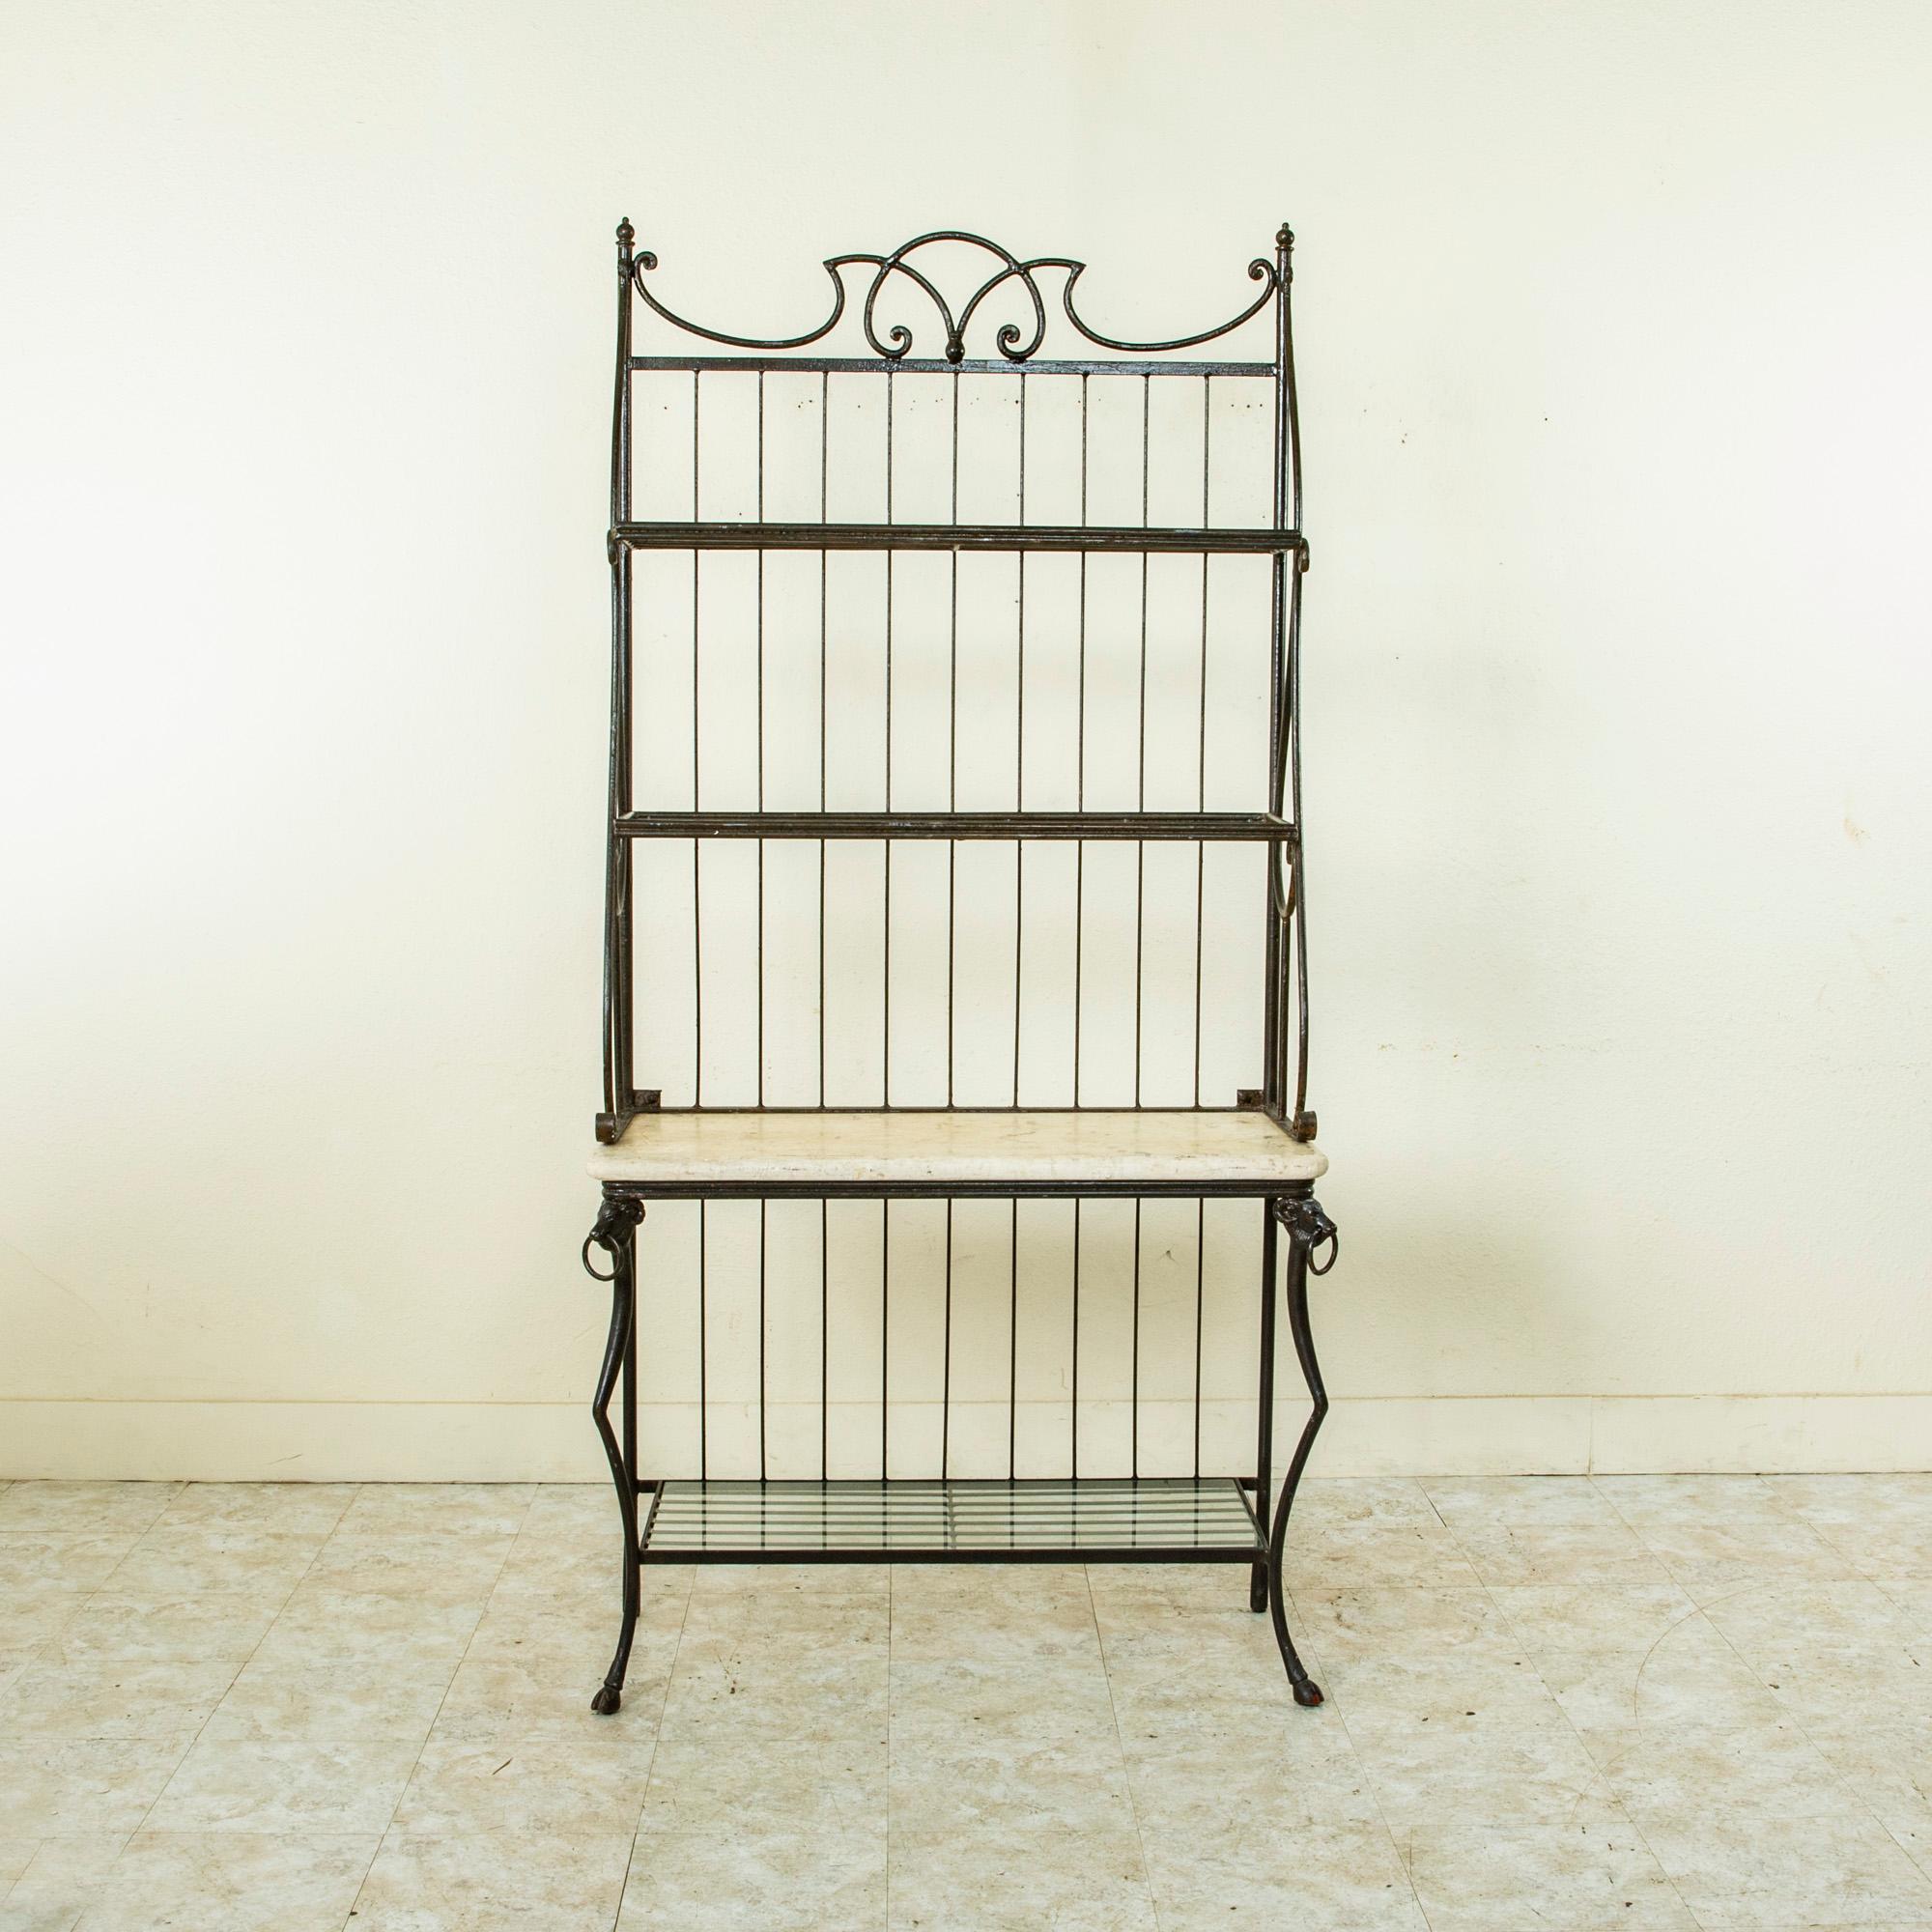 Originally used in a French butcher shop, this iron butchers rack features ram's heads and cloven feet on the base. The base is fitted with a stone top and a lower glass shelf, while the upper section is fitted with two more glass shelves. The piece